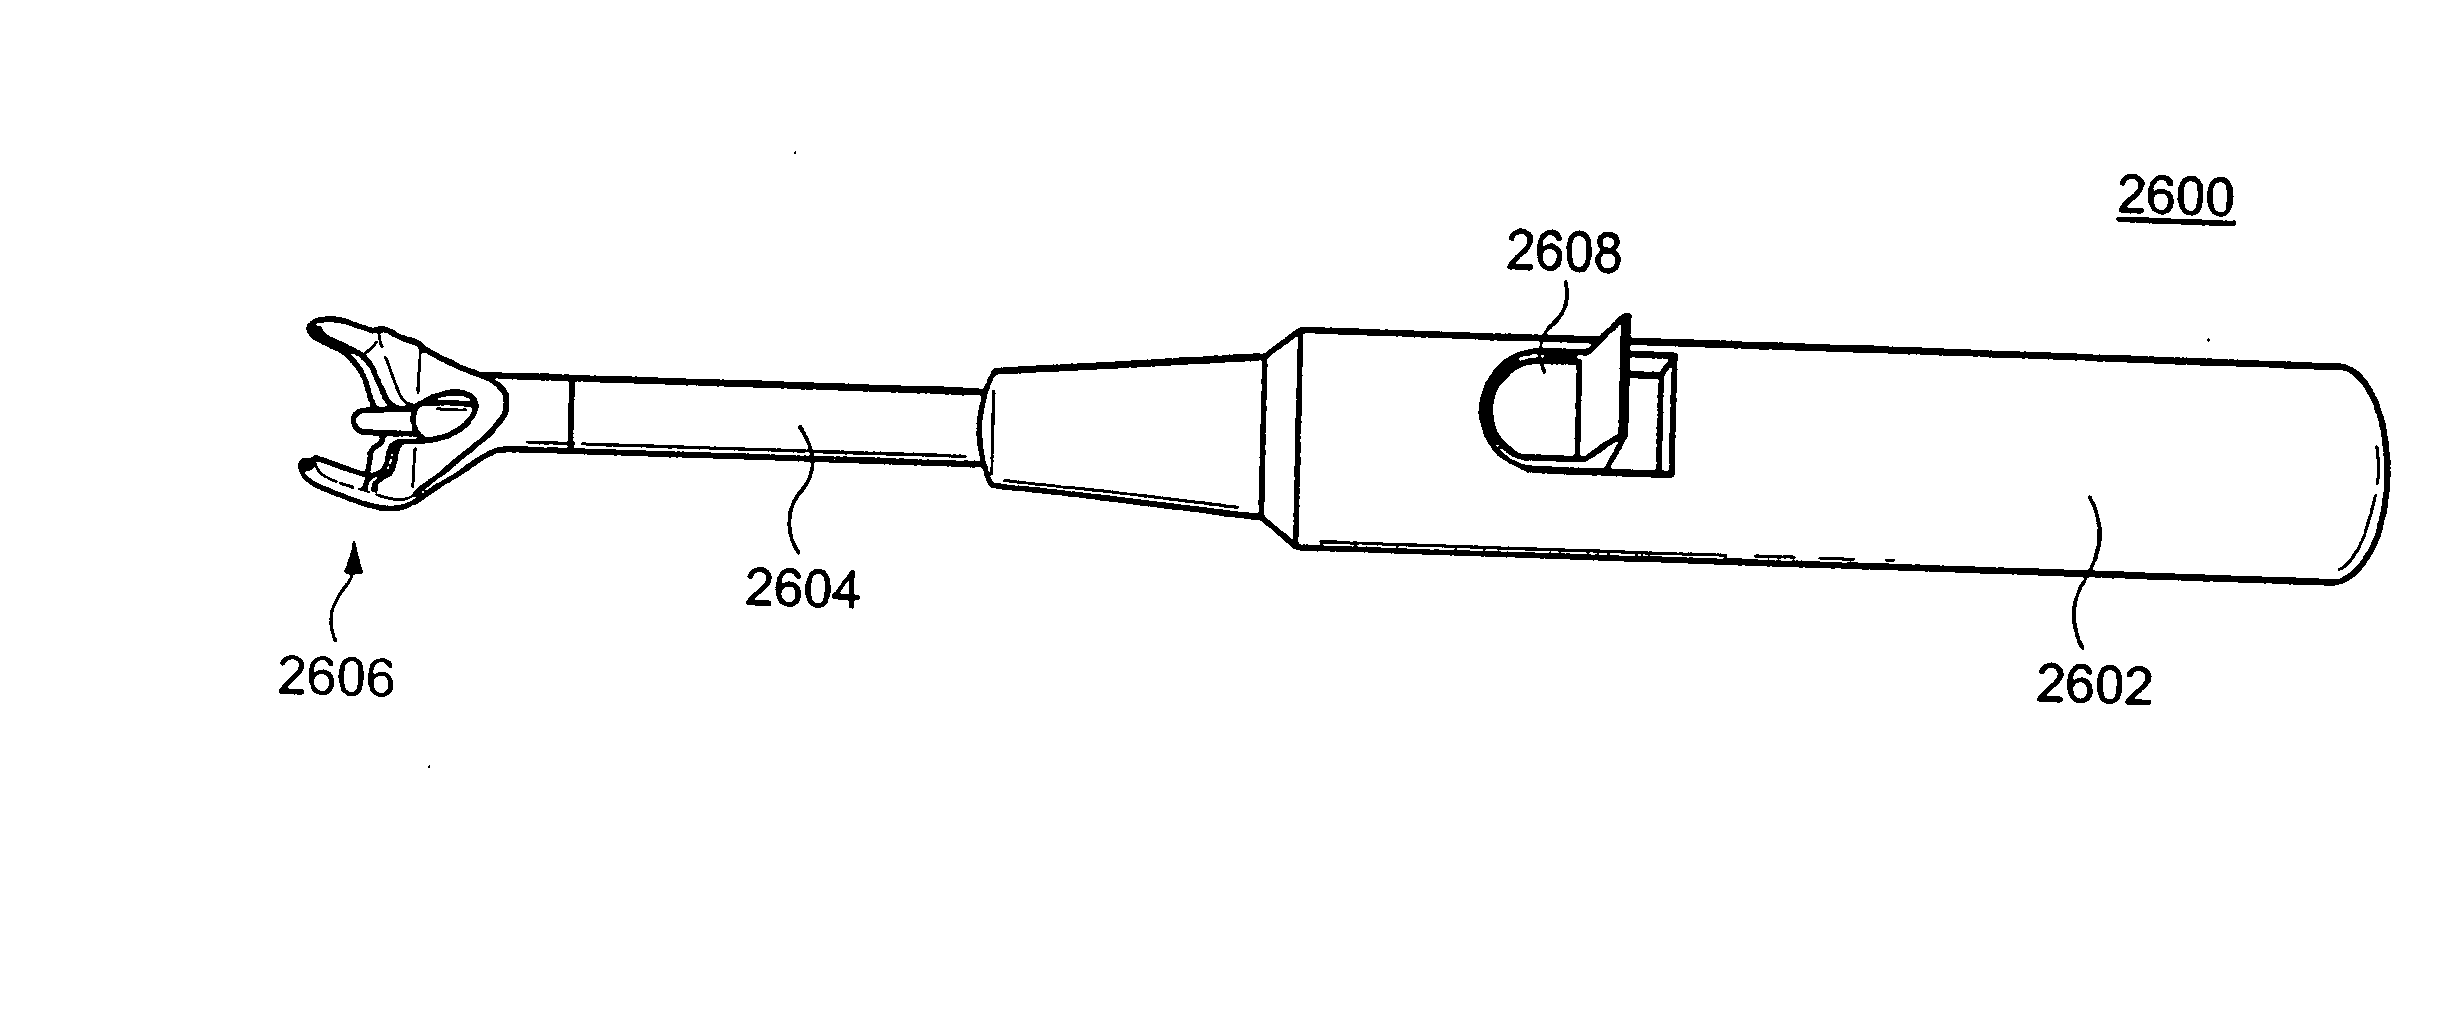 Inter-cervical facet implant with implantation tool